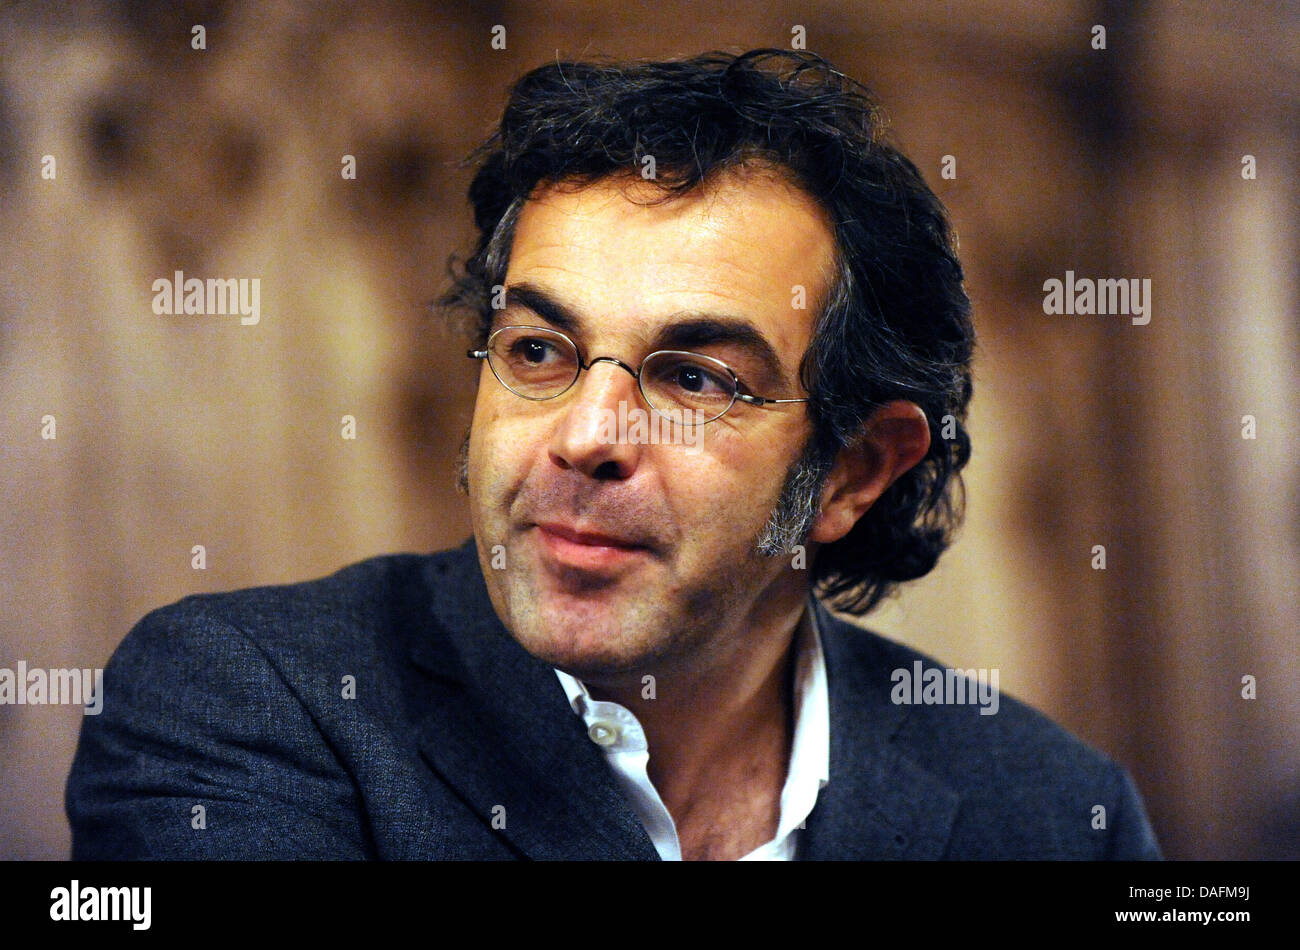 German-Iranian author Navid Kermani speaks during the award ceremony of the 'Hannah-Arendt-Prize for political thinking' at the town hall in Bremen, Germany, 2 December 2011. The awards honours Kermani for his committment for interrelgious dialogue. The city of Bremen and the Heinrich-Boell Foundation have been awarding the Hannah-Arendt-Prize since 1995. The prize is endowed with  Stock Photo